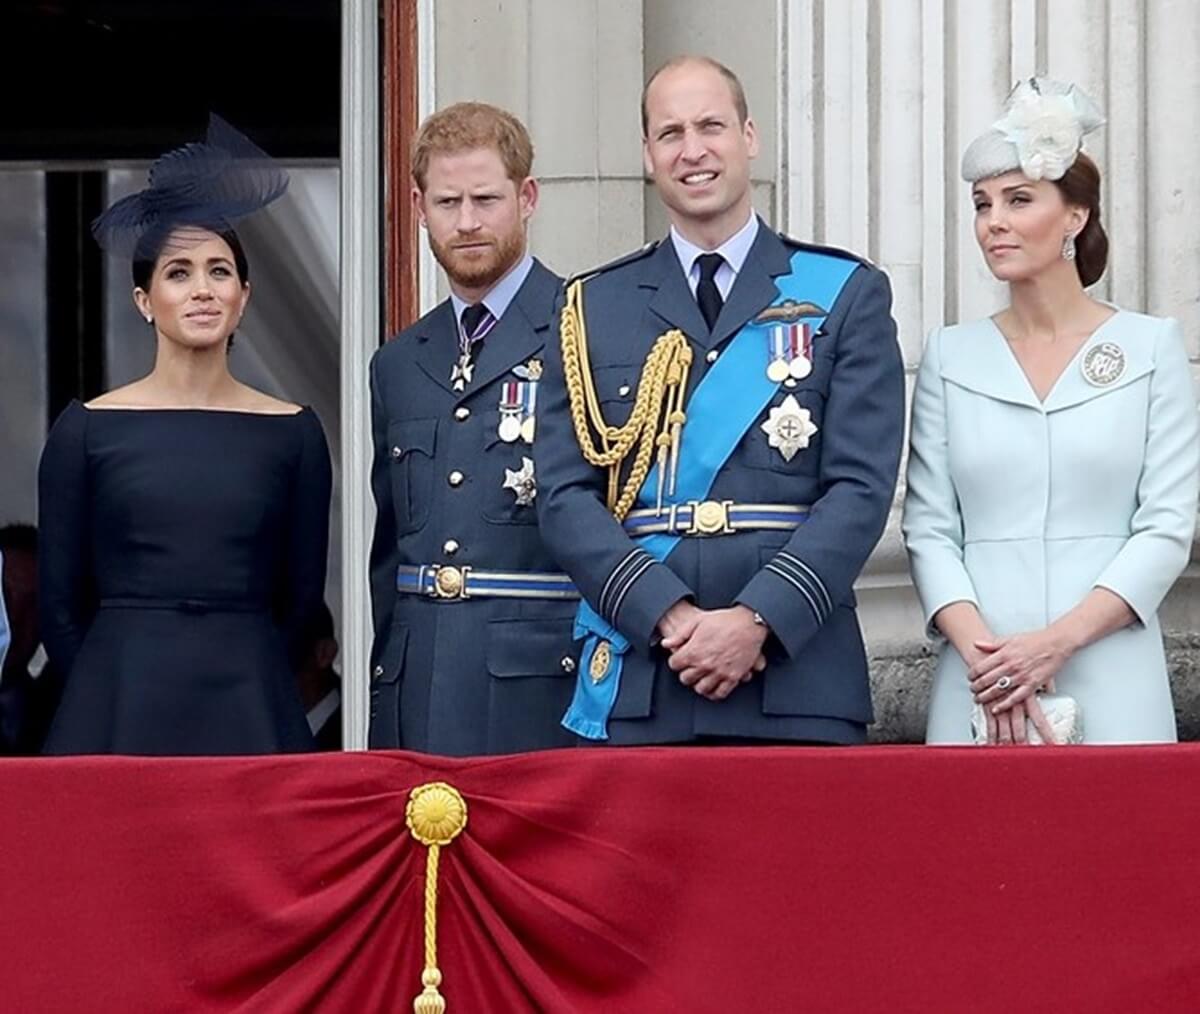 Meghan Markle, Prince Harry, Prince William, and Kate Middleton watch the RAF flypast on the balcony of Buckingham Palace